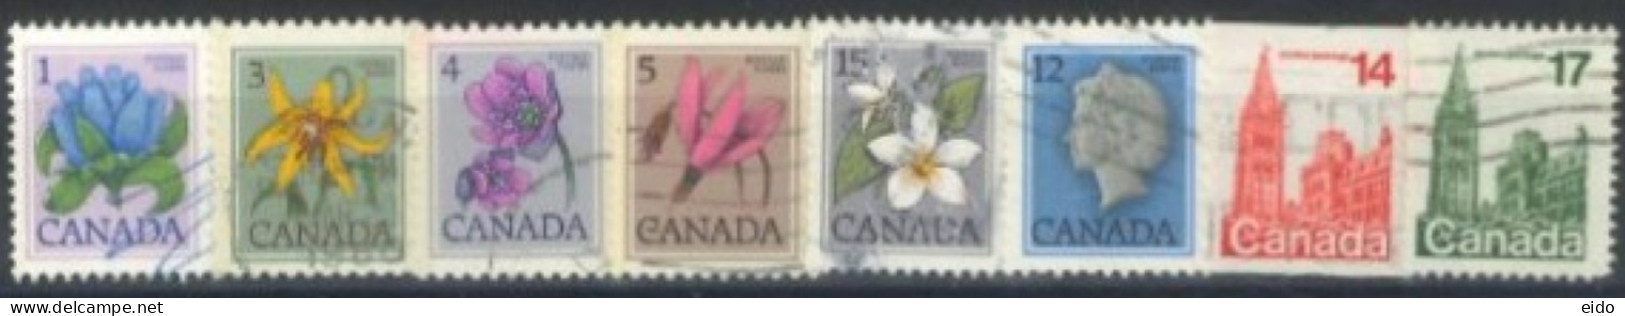 CANADA - 1977, QUEEN ELIZABETH II, HOUSE OF PARLIAMENT, FLOWERS STAMPS SET OF 8, USED. - Usati